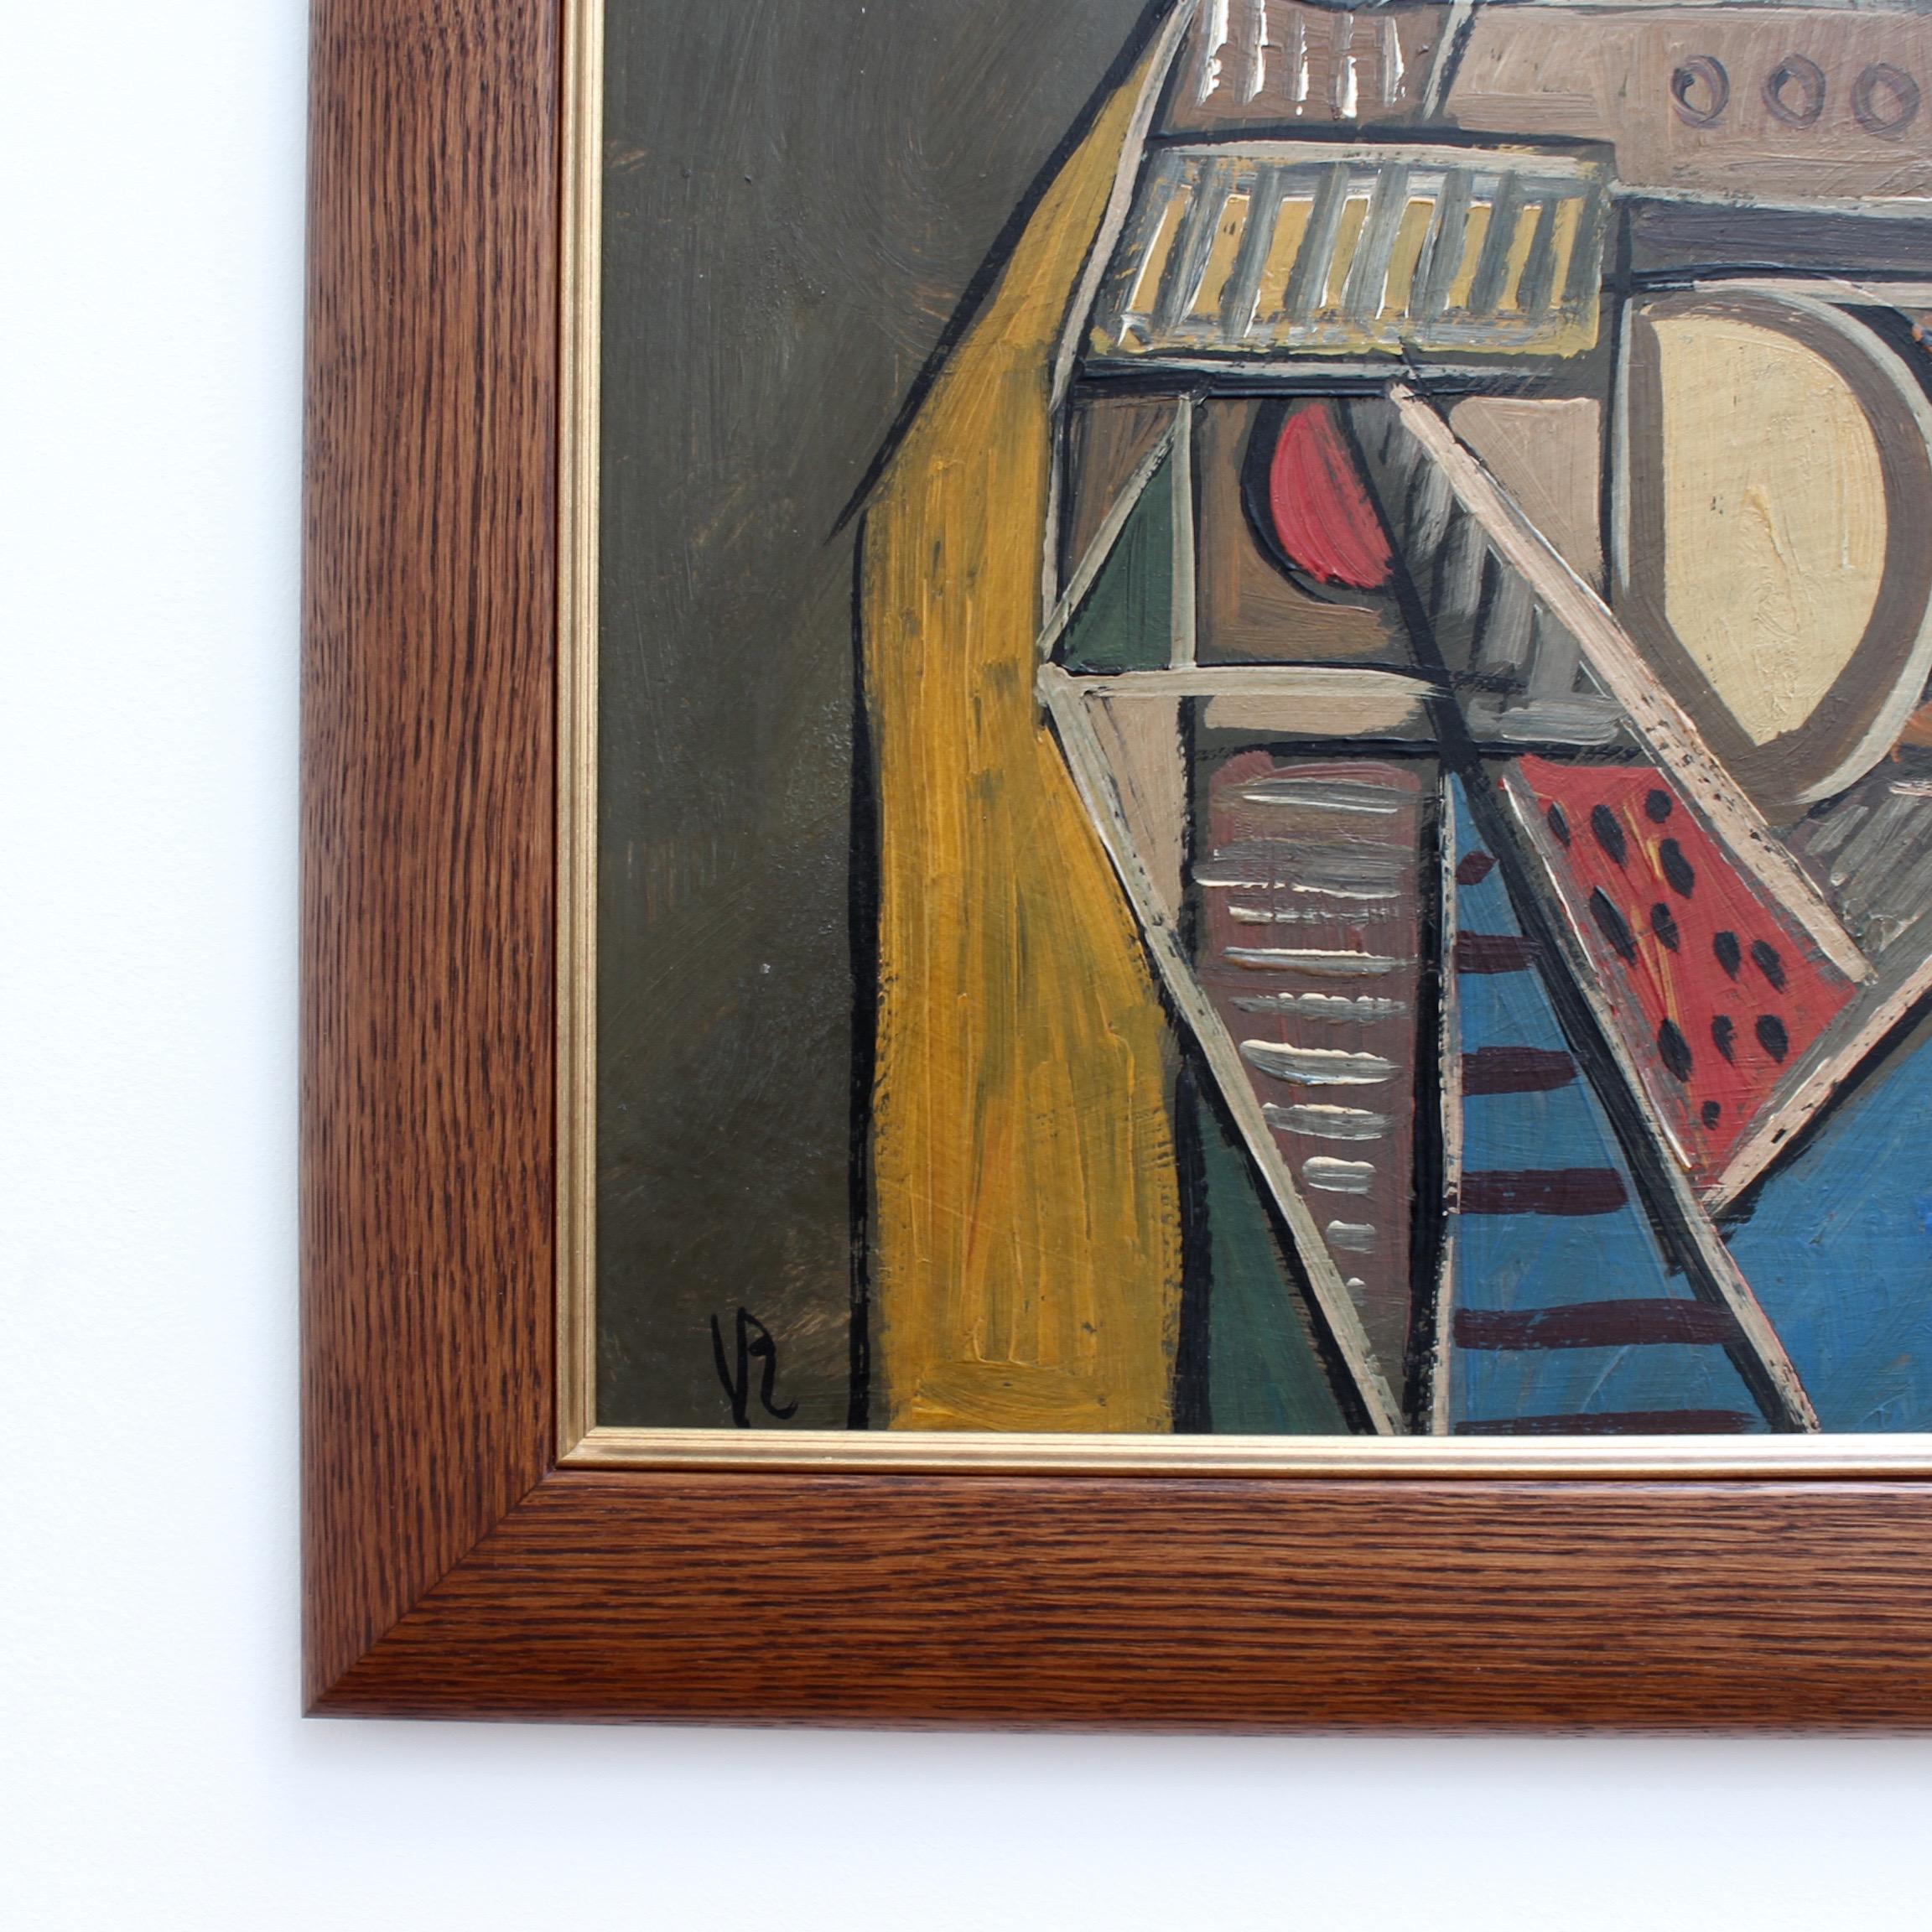 'Cubist Instrumentalist' by V.R., Mid-Century Abstract Oil Painting, Berlin 2